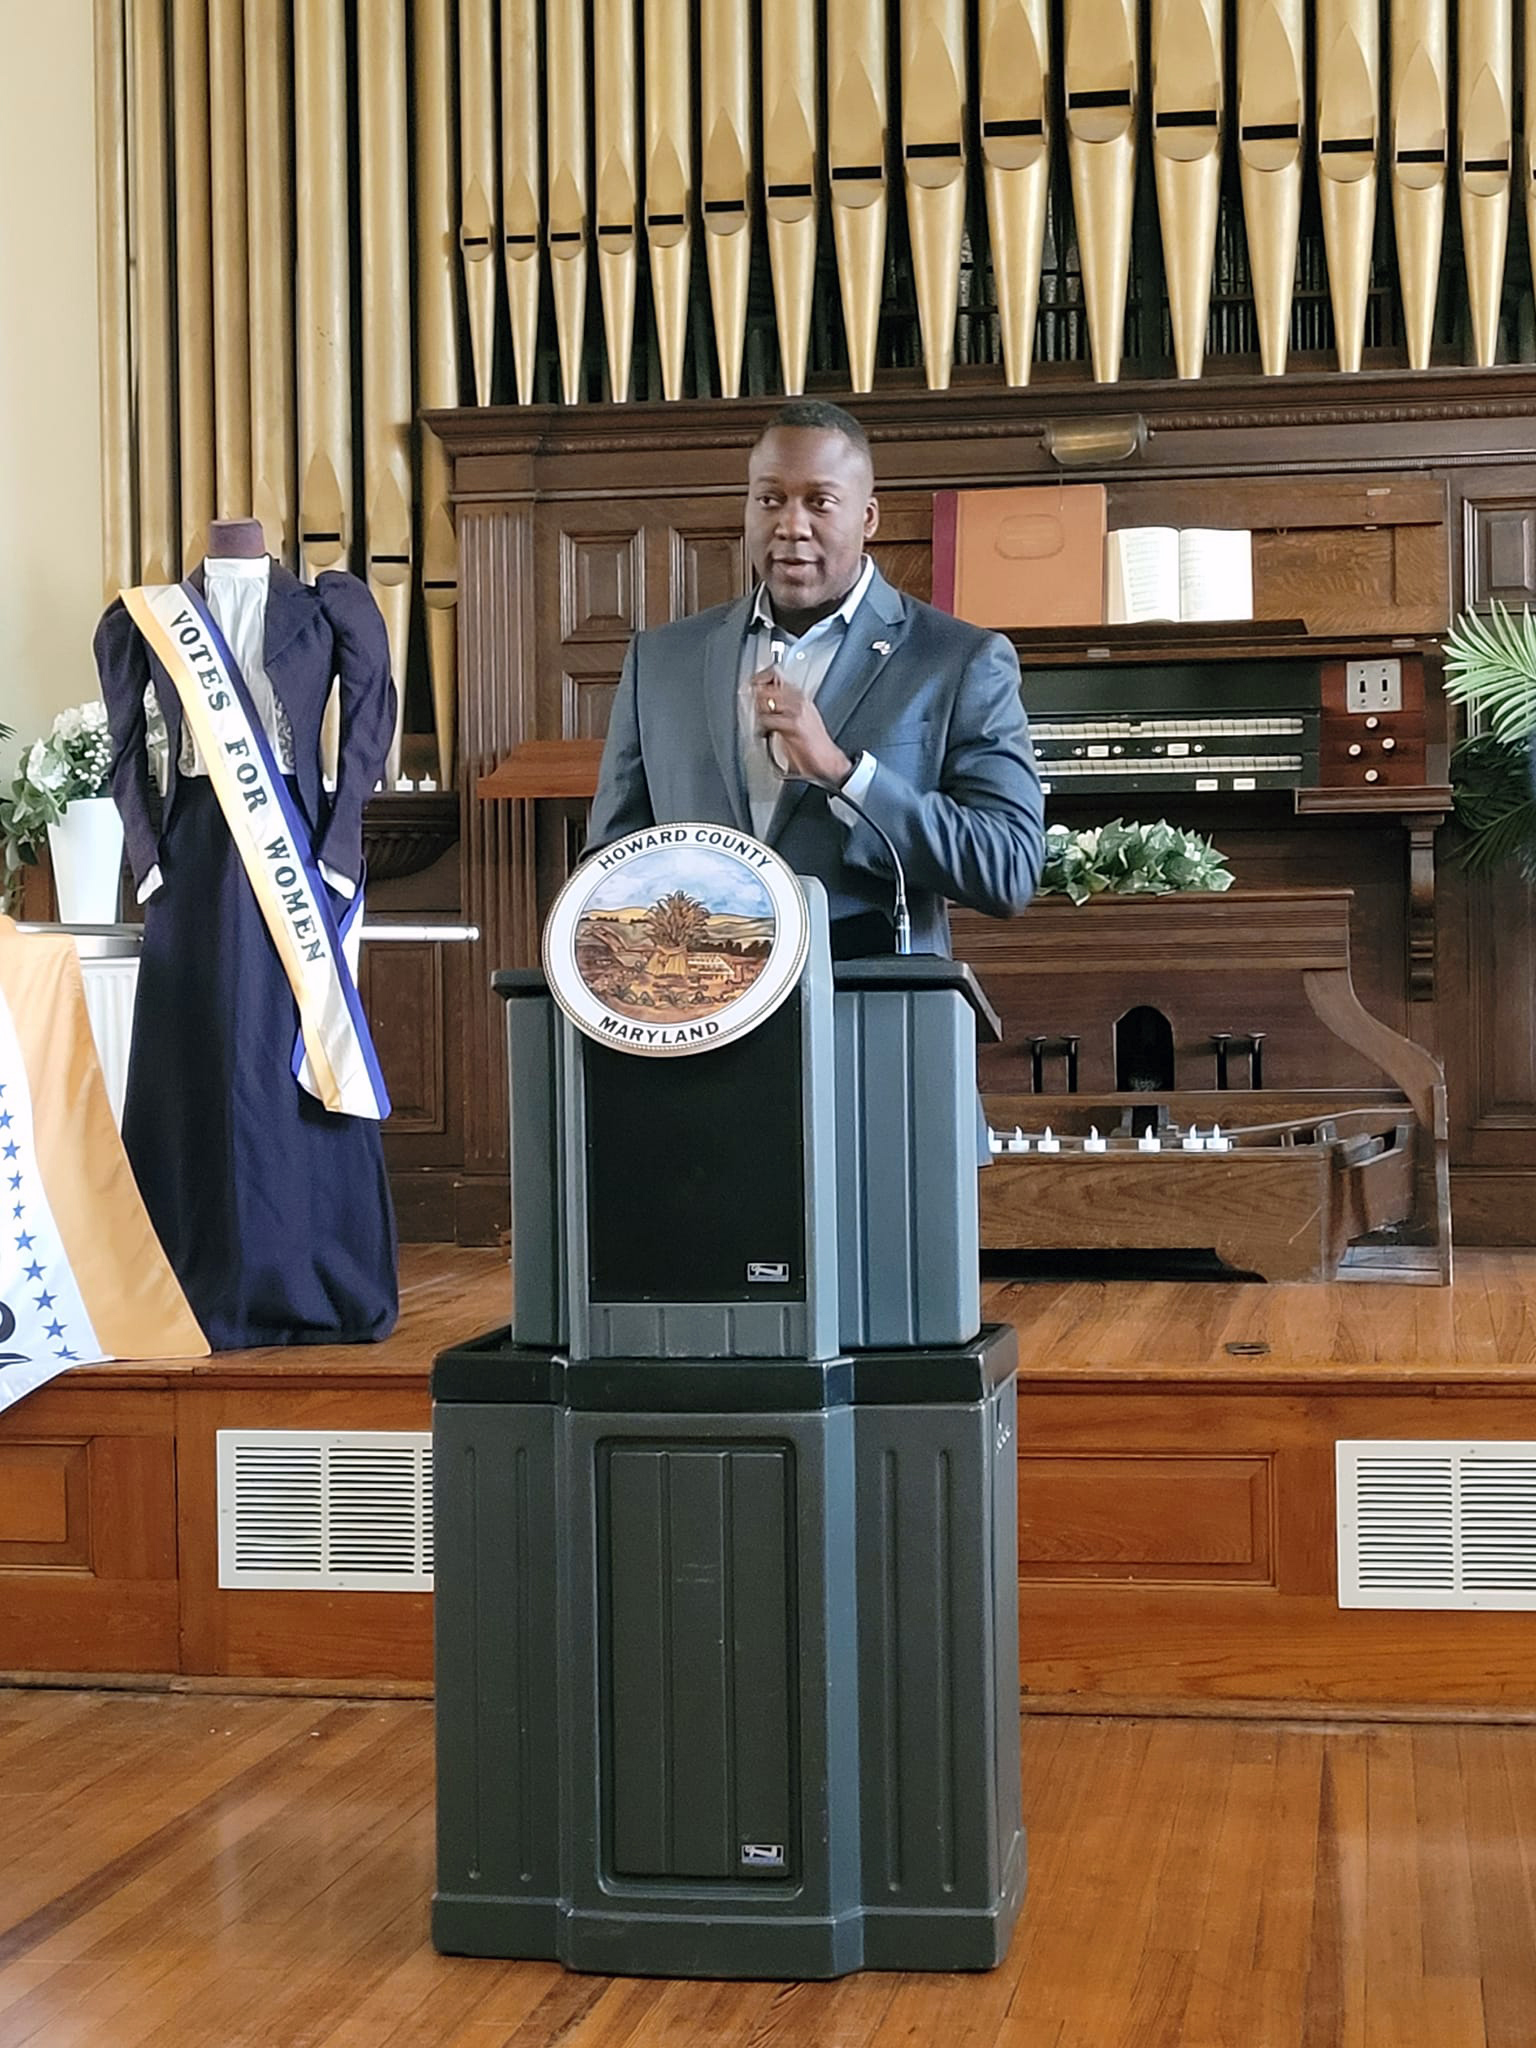 Howard County Executive Calvin Ball at Lectern at the November 2021 unveiling of Laura Byrne's historical marker